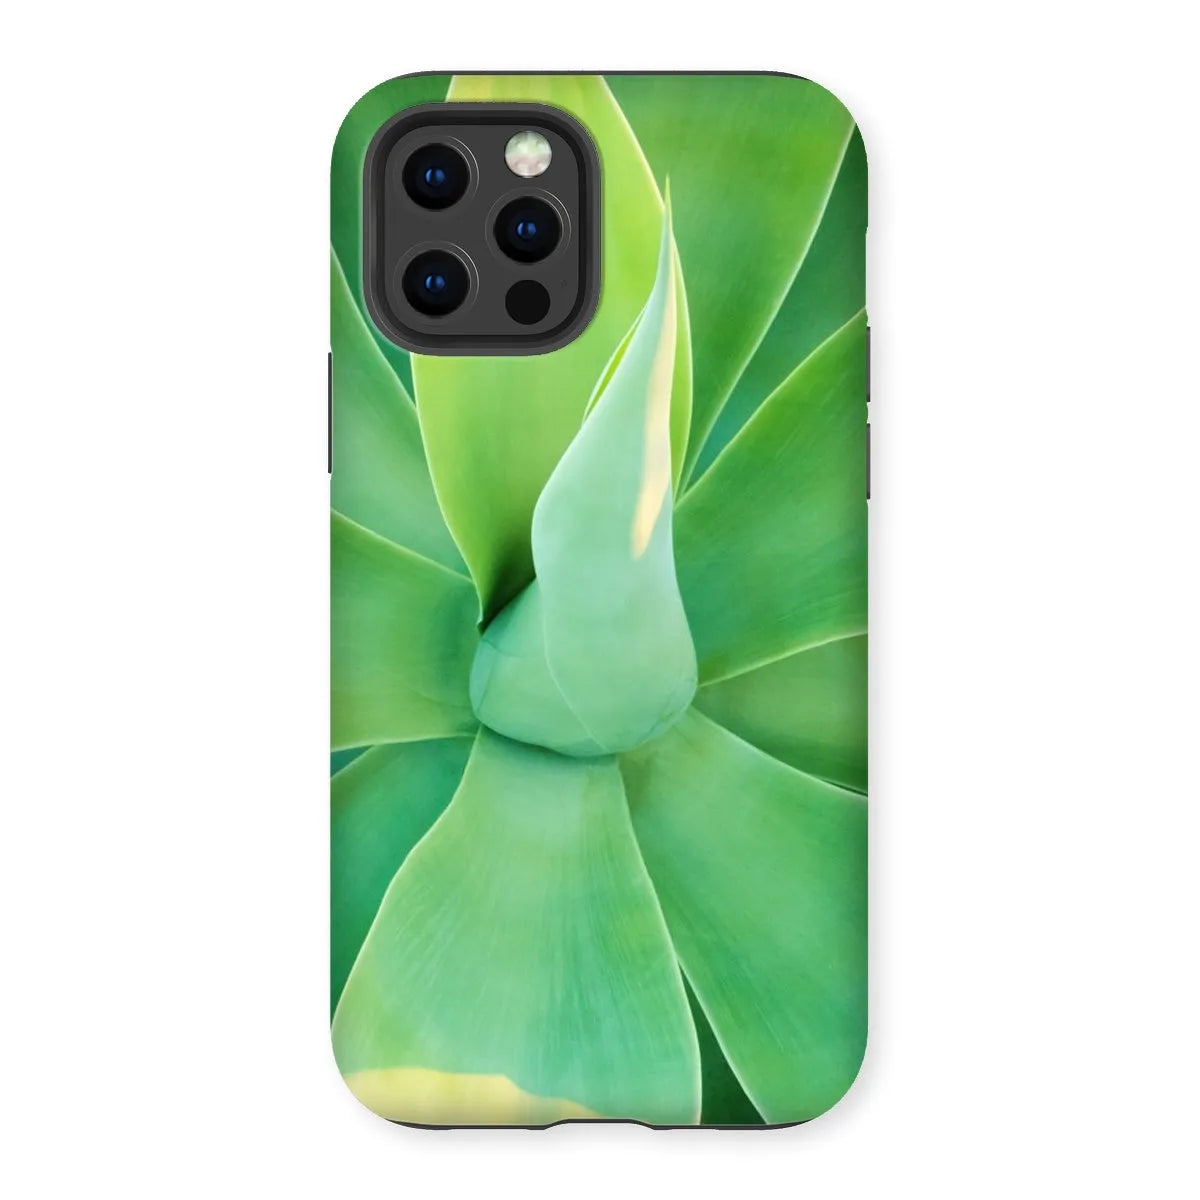 In Bloom Too Tough Phone Case - Iphone 12 Pro / Matte - Mobile Phone Cases - Aesthetic Art